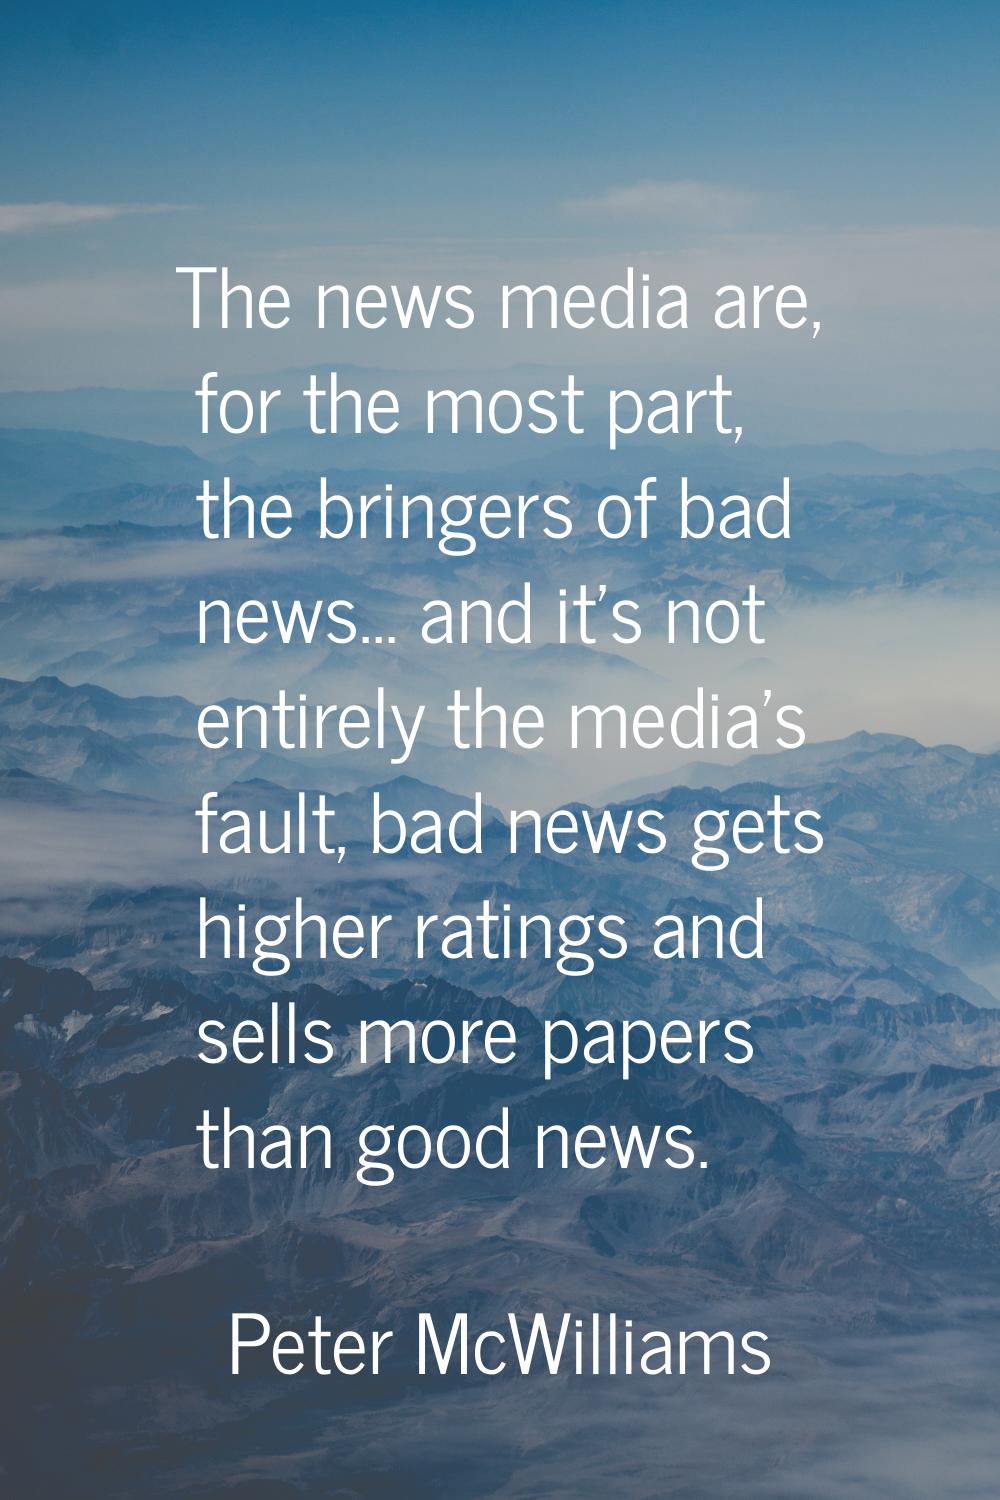 The news media are, for the most part, the bringers of bad news... and it's not entirely the media'